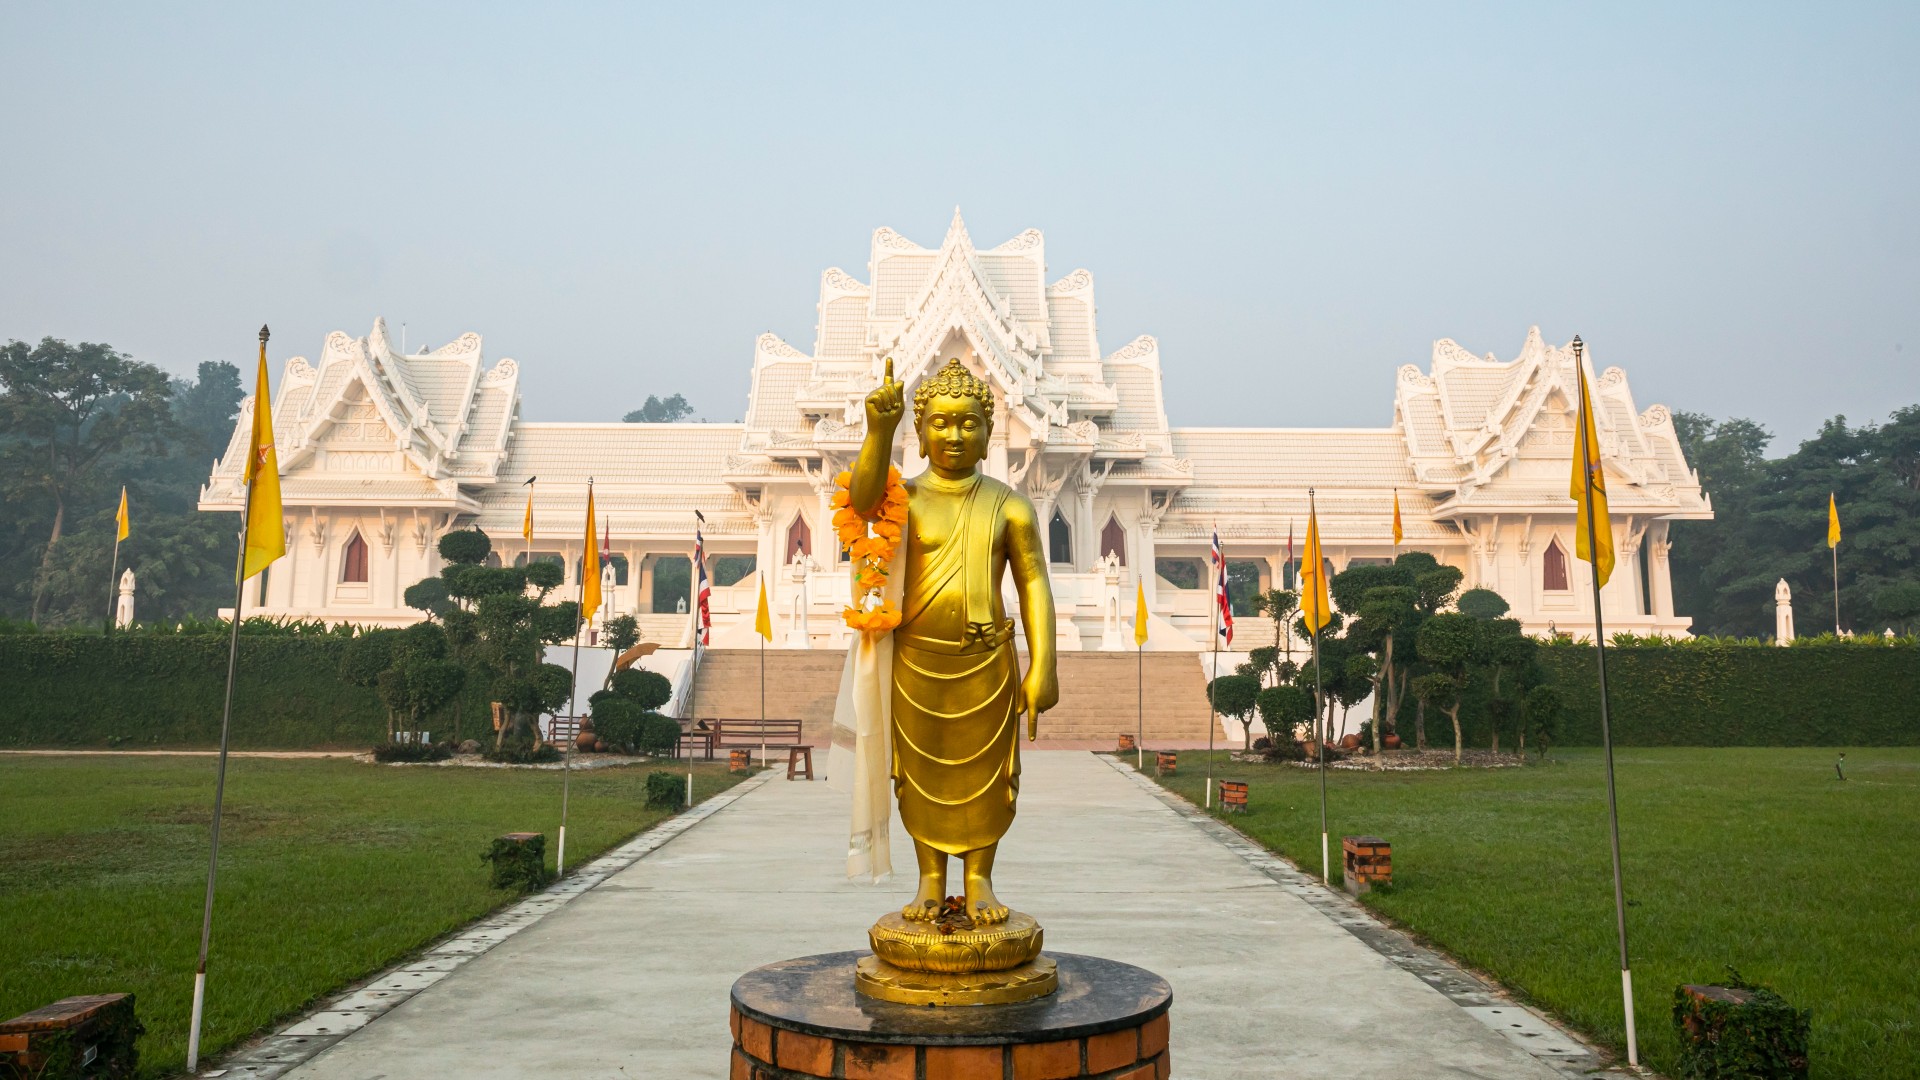 Here is the Royal Thai Monastery in Lumbini, Nepal. Front and center there is a standing golden Buddha statue, with one arm raised pointing upwards. Behind the statue is a white/grey path lined with yellow flags that leads to the white wat-style monastery. It is surrounded by a tall green hedge. The sky is a clear, light blue.